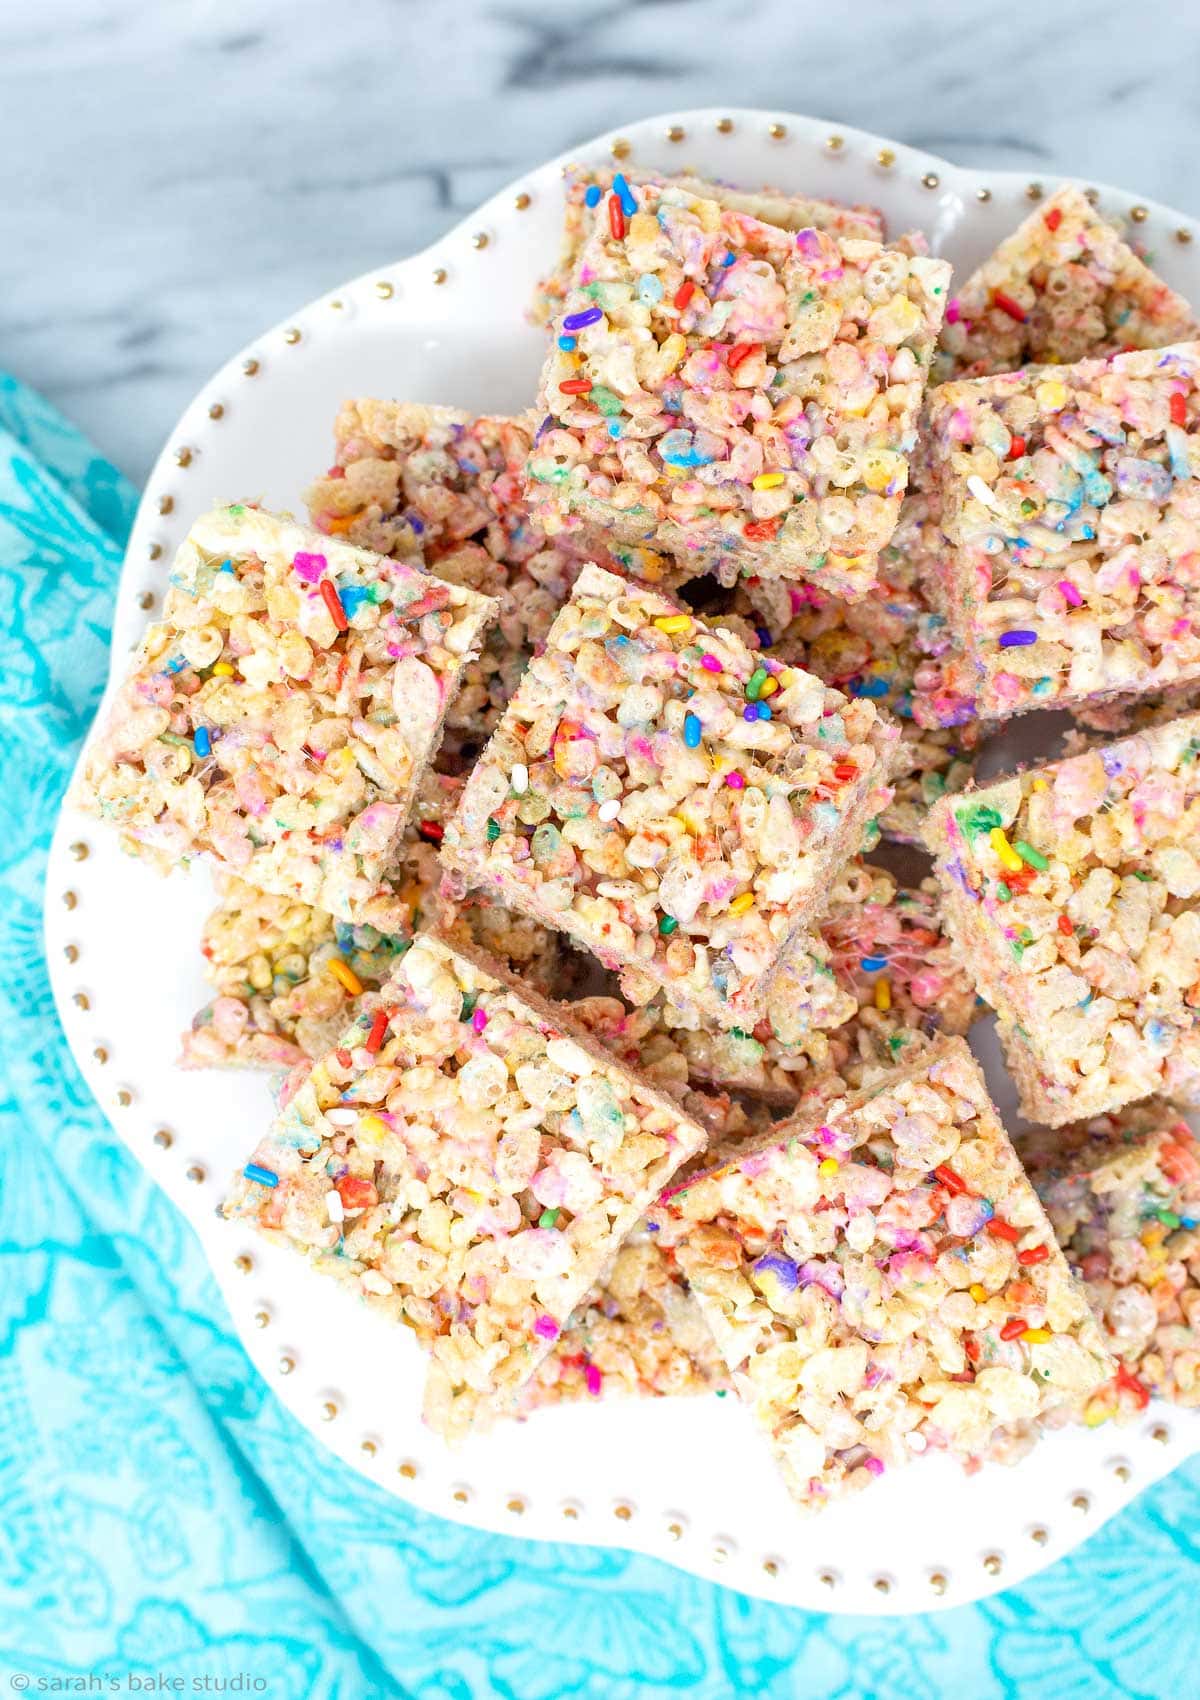 Confetti Rice Krispies Treats - your favorite cereal treats get fancy with the addition of rainbow sprinkles.